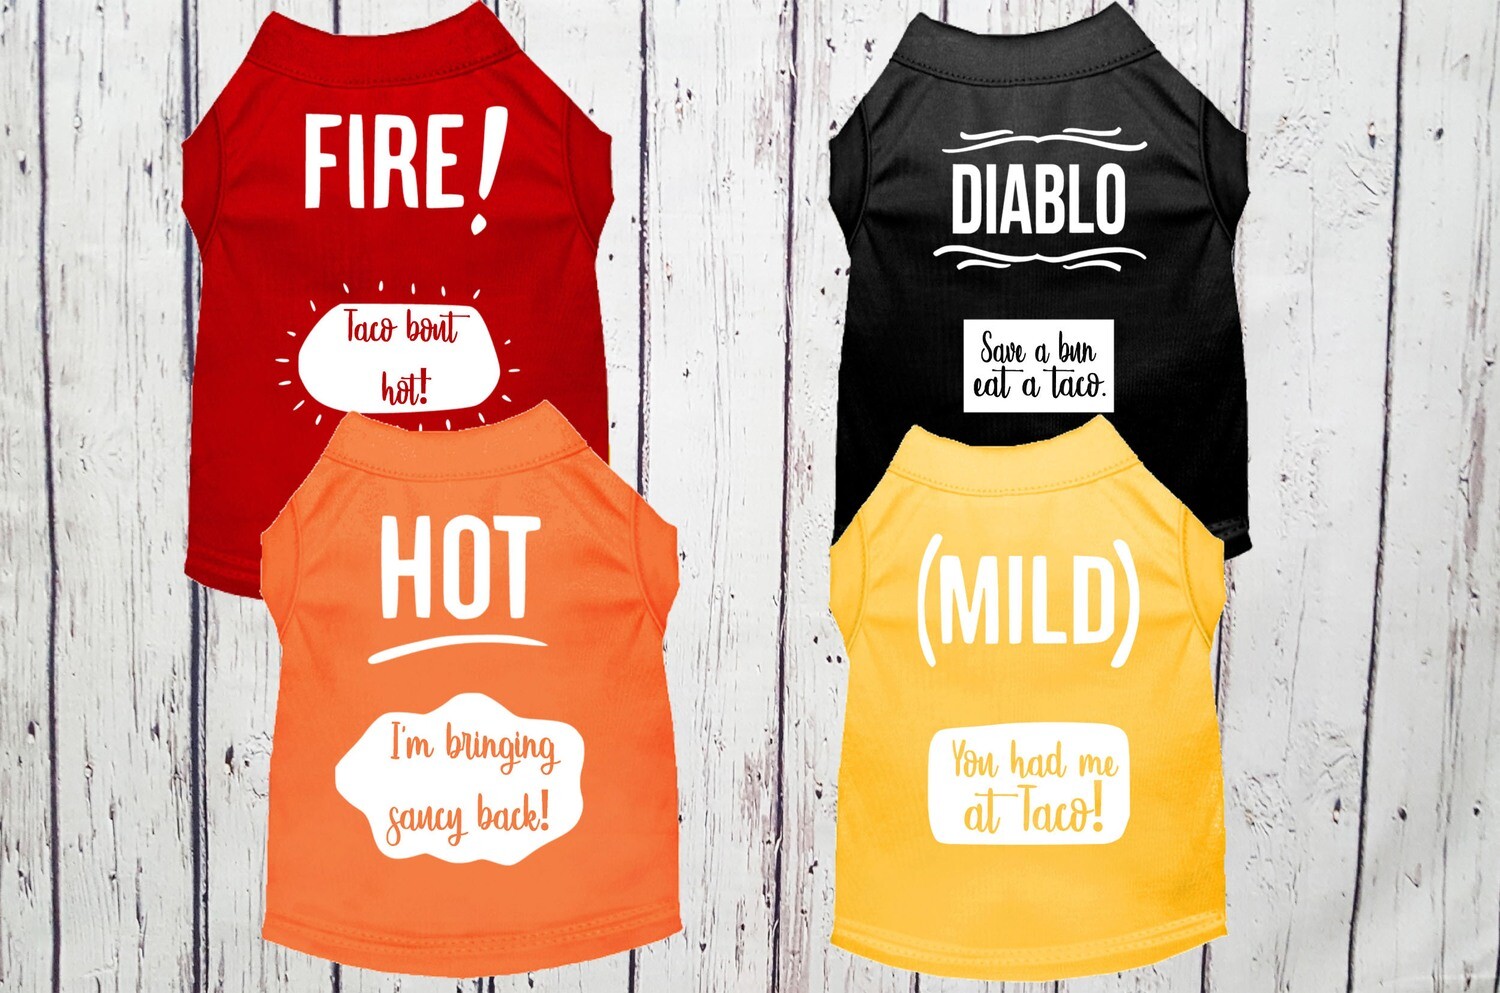 Halloween Taco Sauce Tshirts For Pet Dogs Cats - Matching Taco Sauce Packets  Dog Costumes TShirts - Shirts Tops For Mild Hot Fire Pets